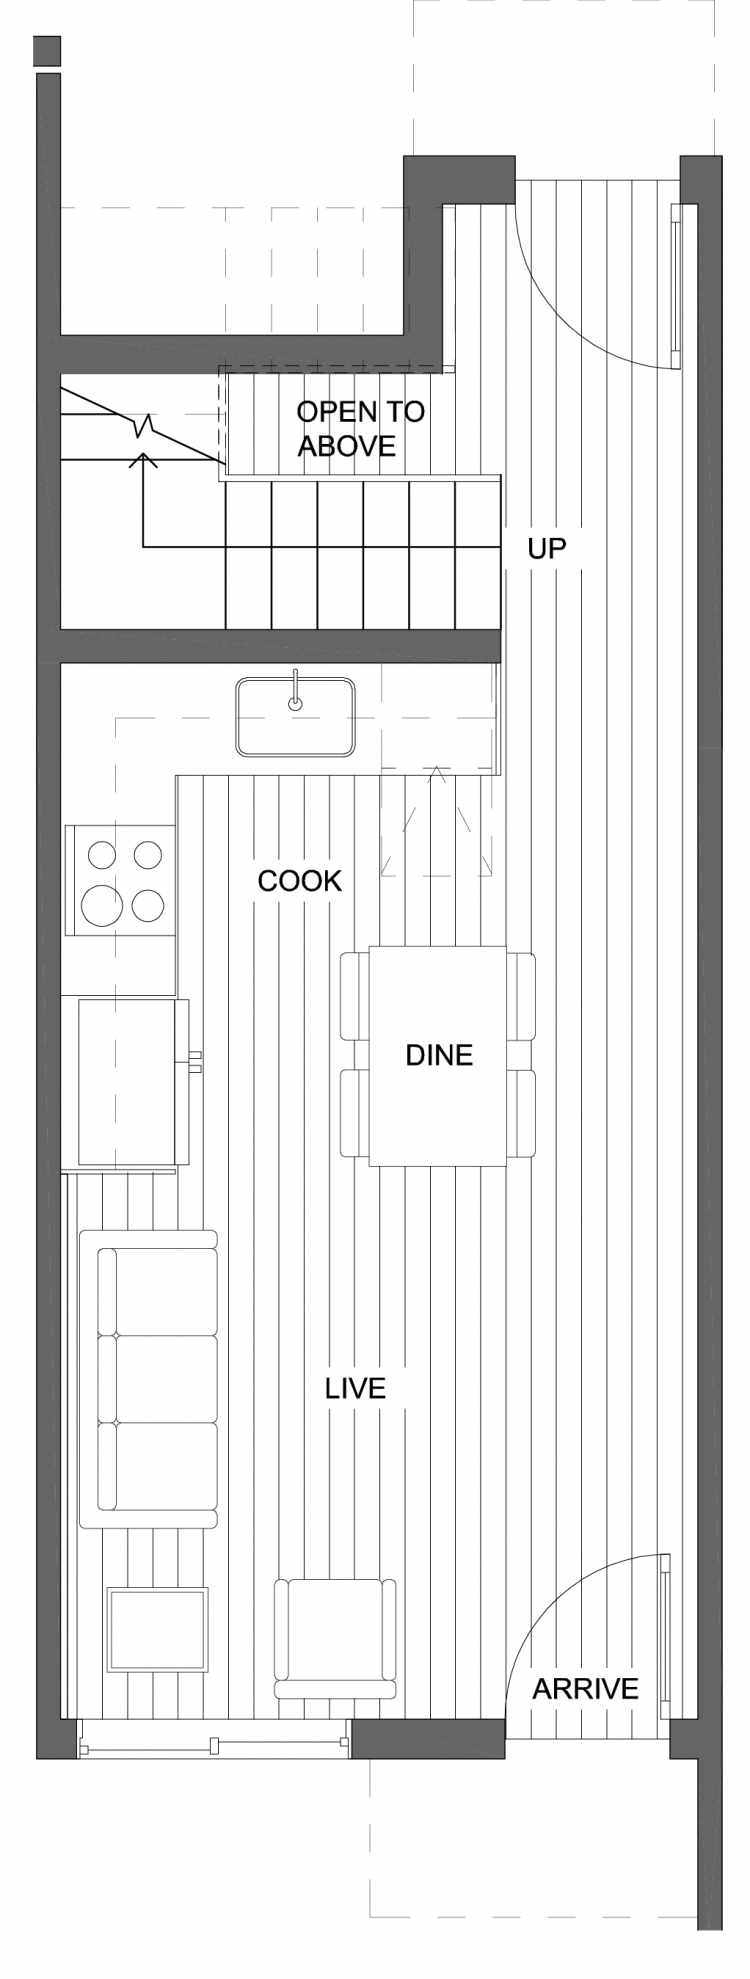 First Floor Plan of 10421 Alderbrook Pl NW, One of the Zinnia Townhomes in the Greenwood Neighborhood of Seattle